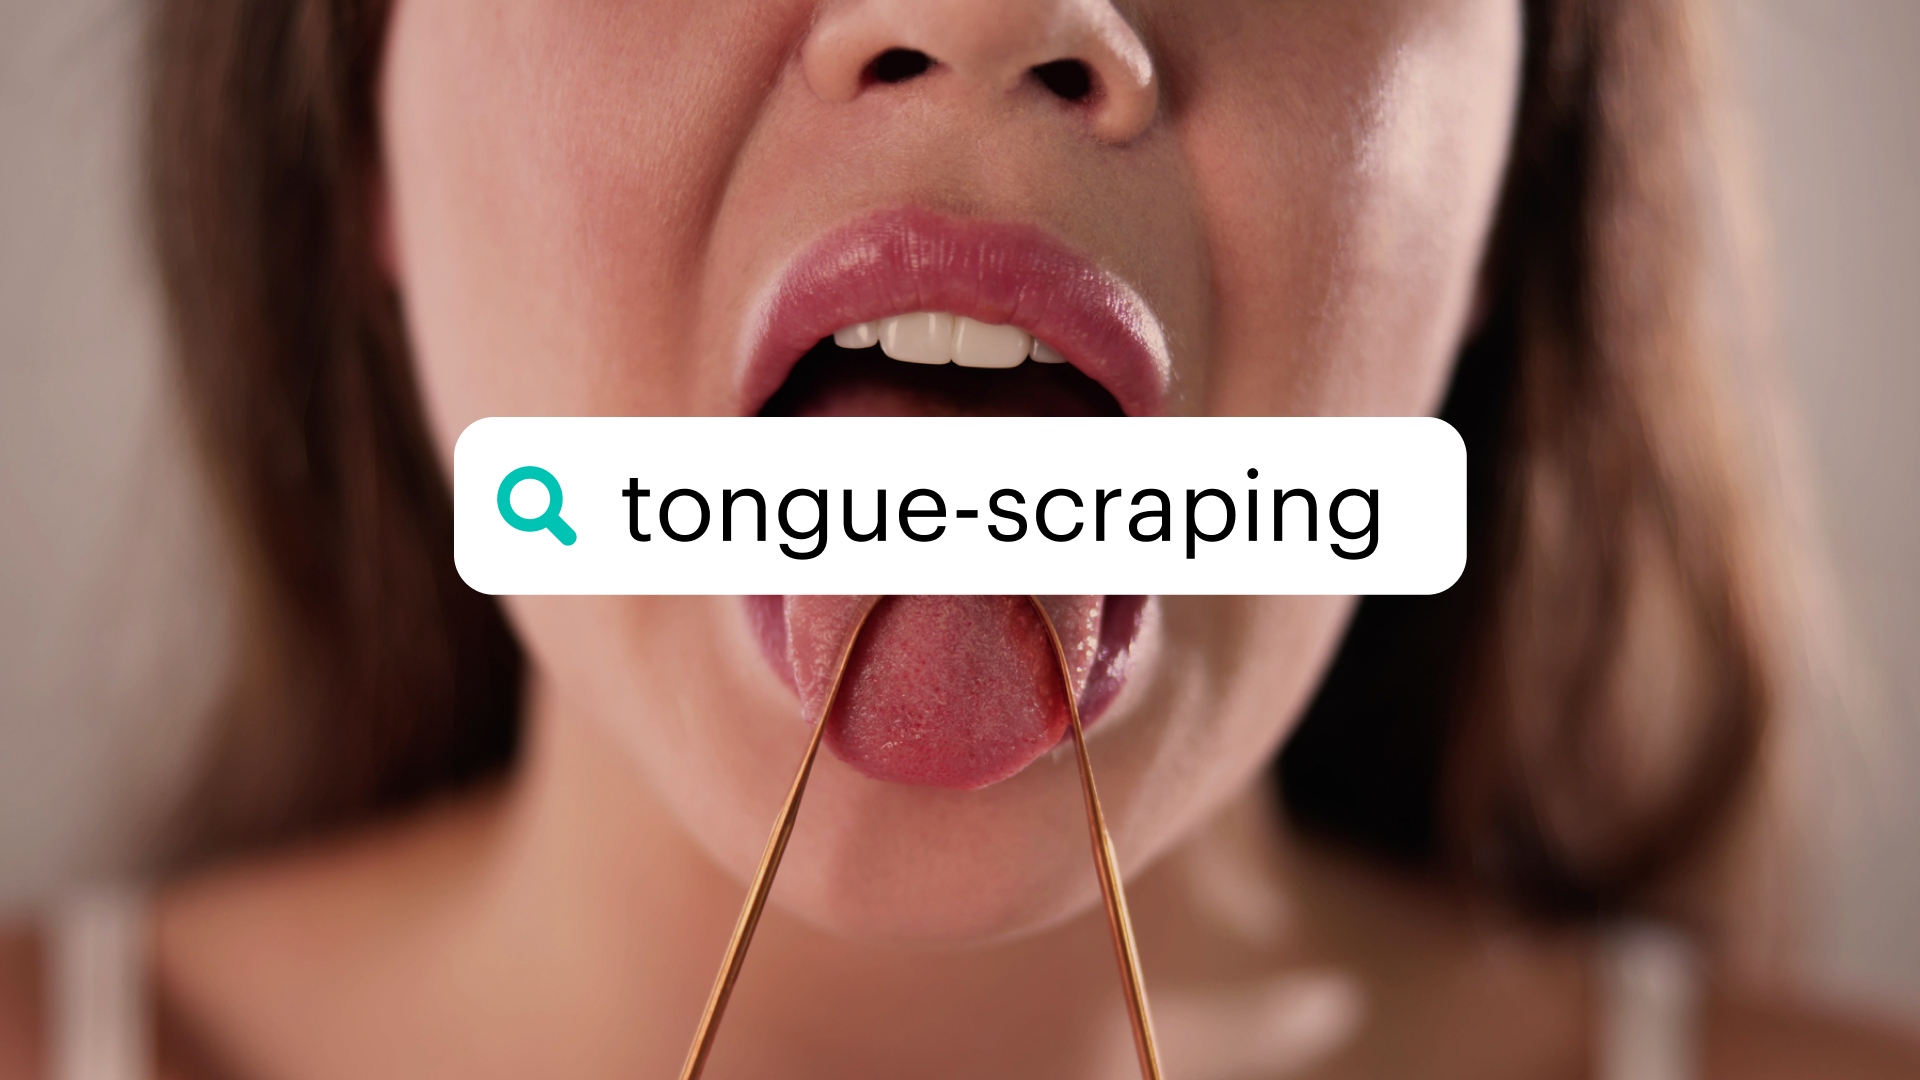 Are There Any Benefits to Tongue Scraping? - The New York Times